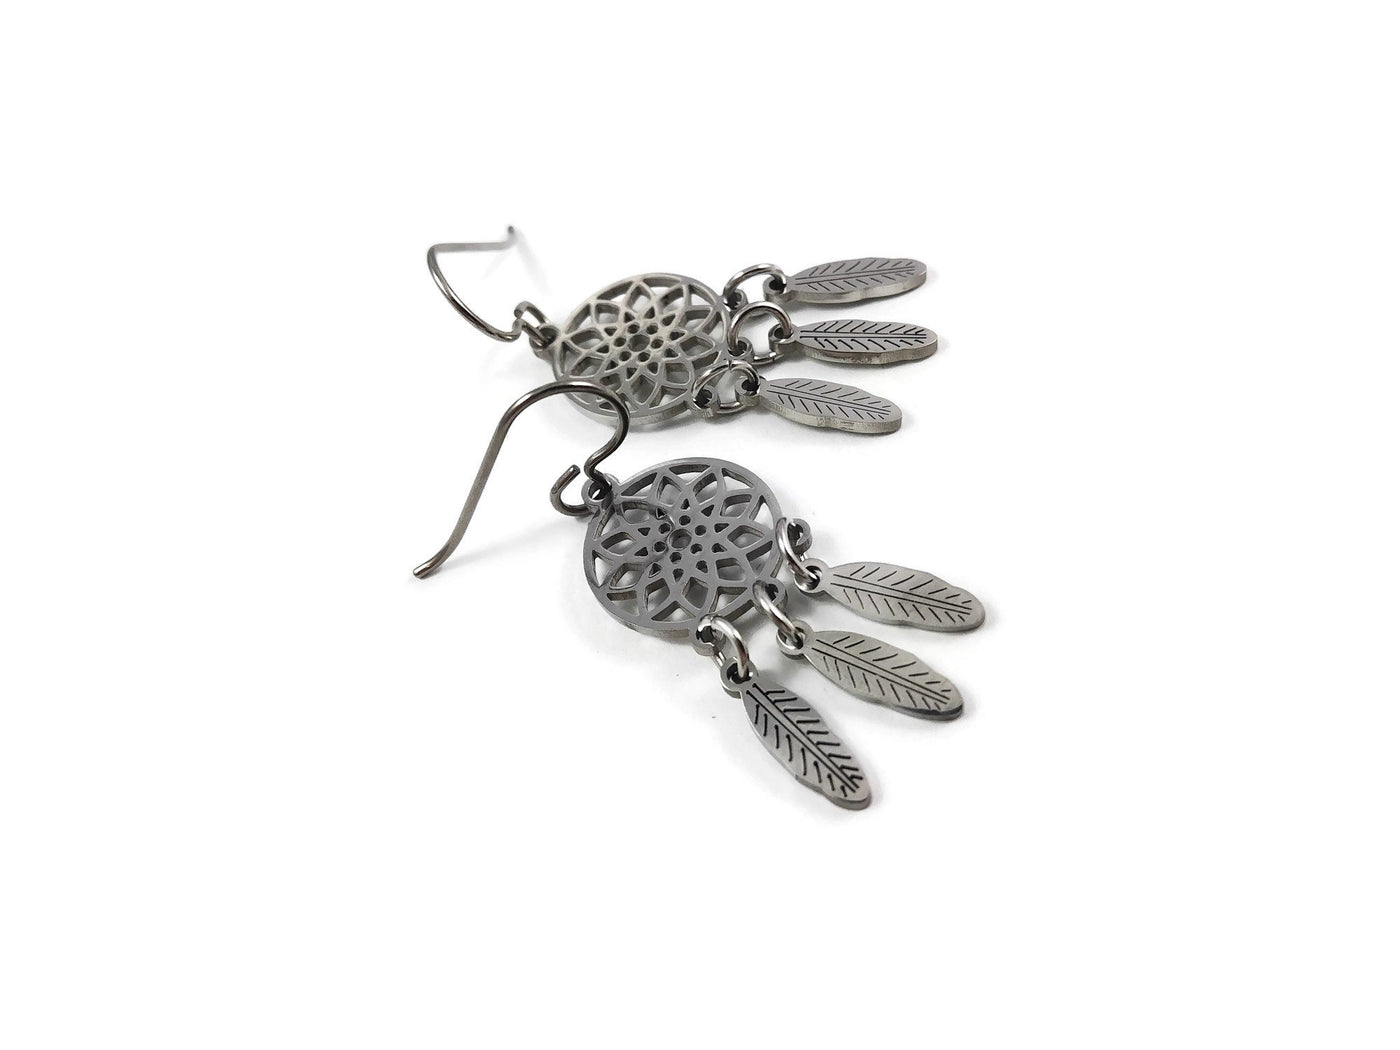 Dreamcatcher dangle earrings - Pure titanium and stainless steel